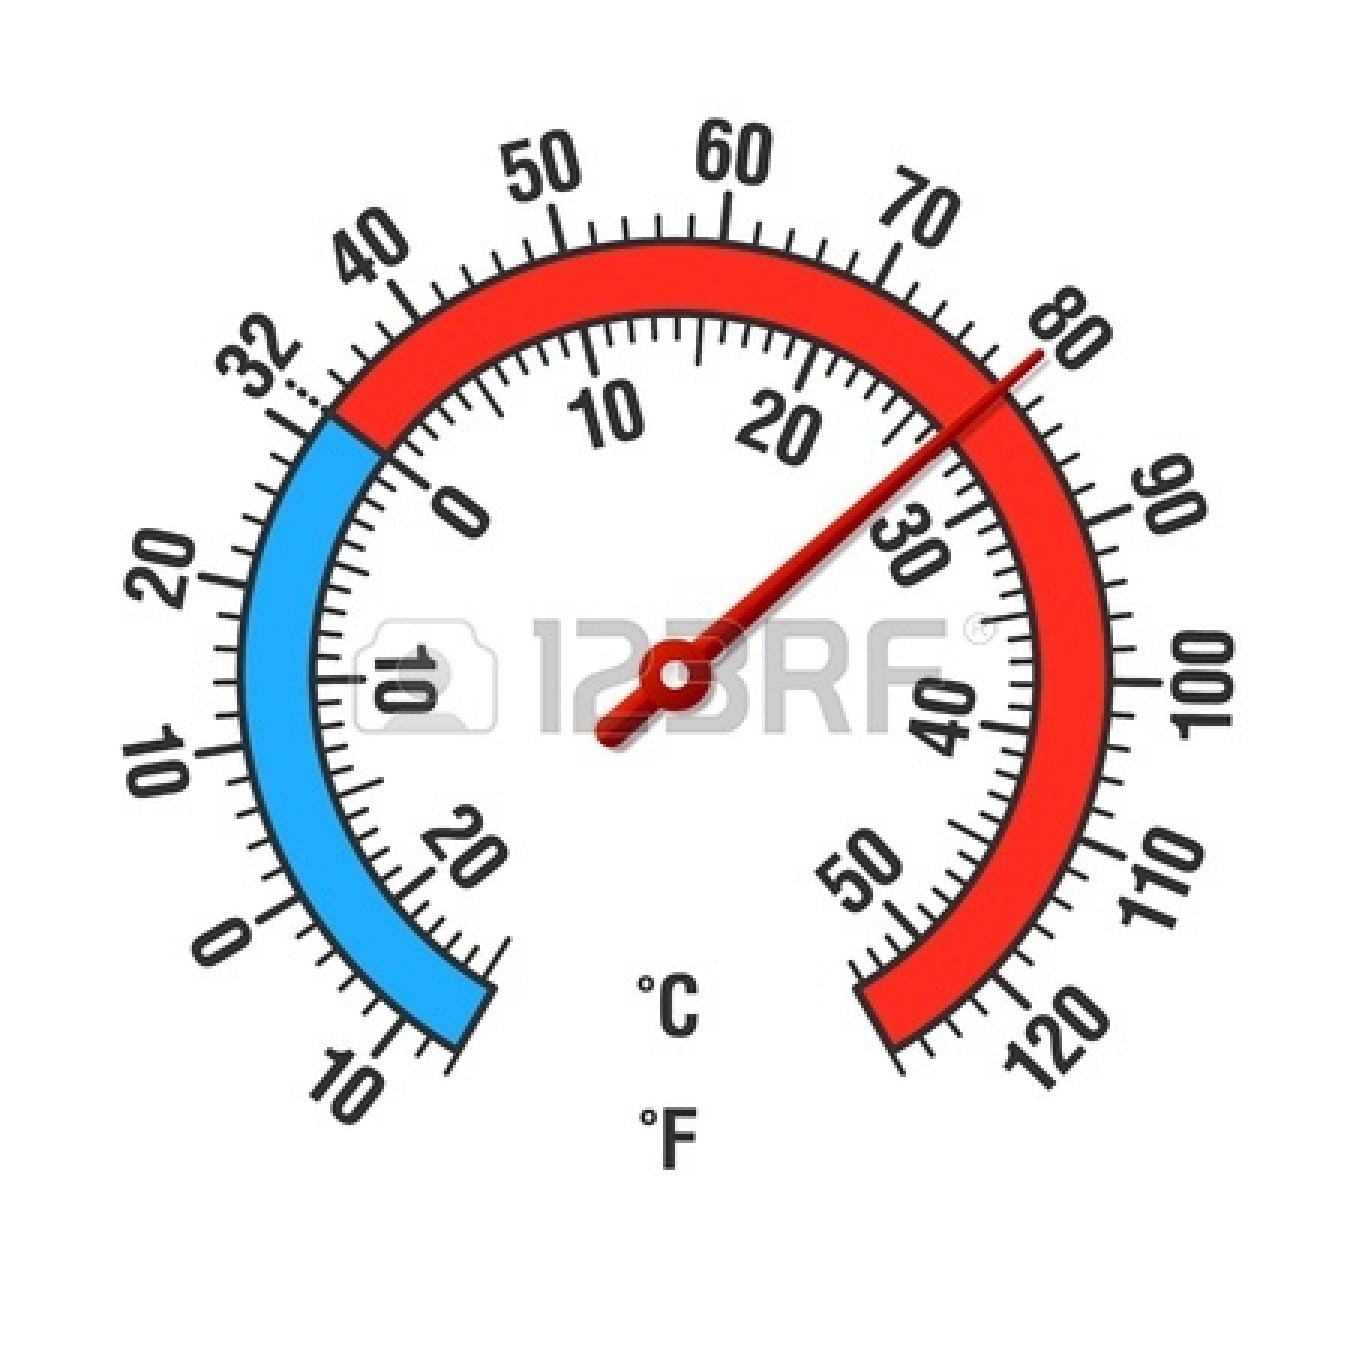 Thermostat Clipart   Clipart Panda   Free Clipart Images